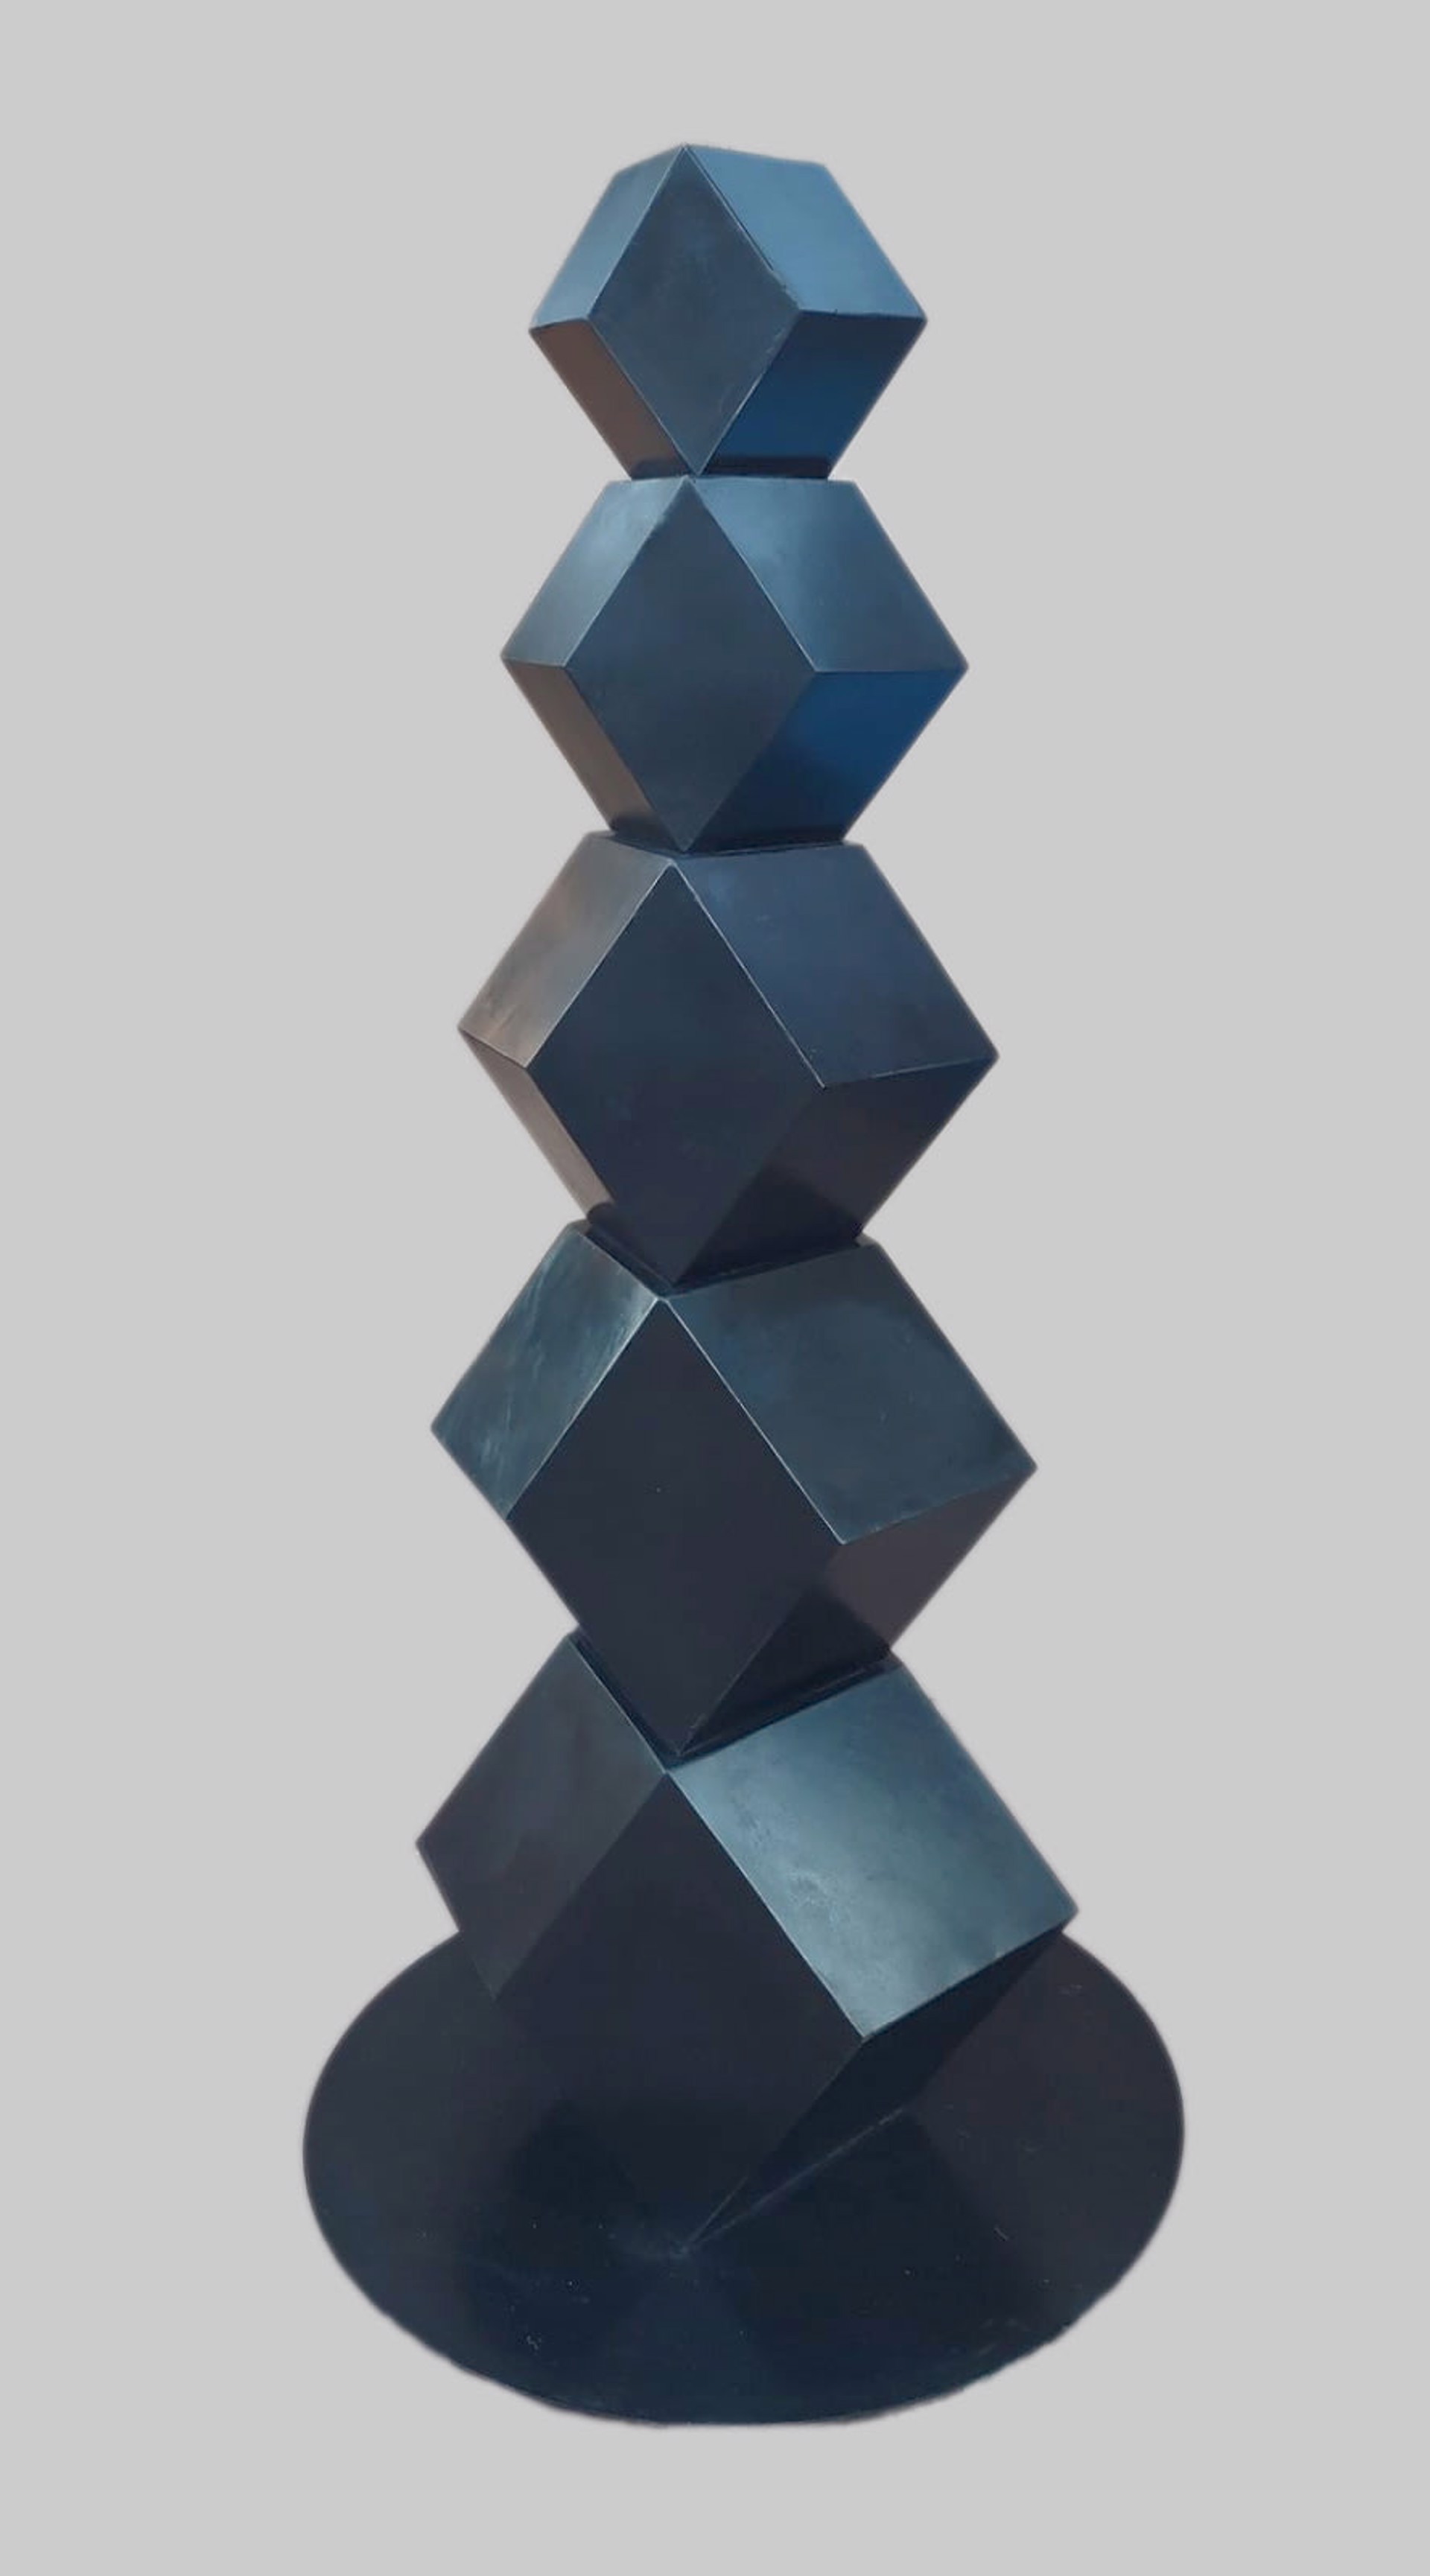 RHOMBIC PILLAR by Laird Hovland